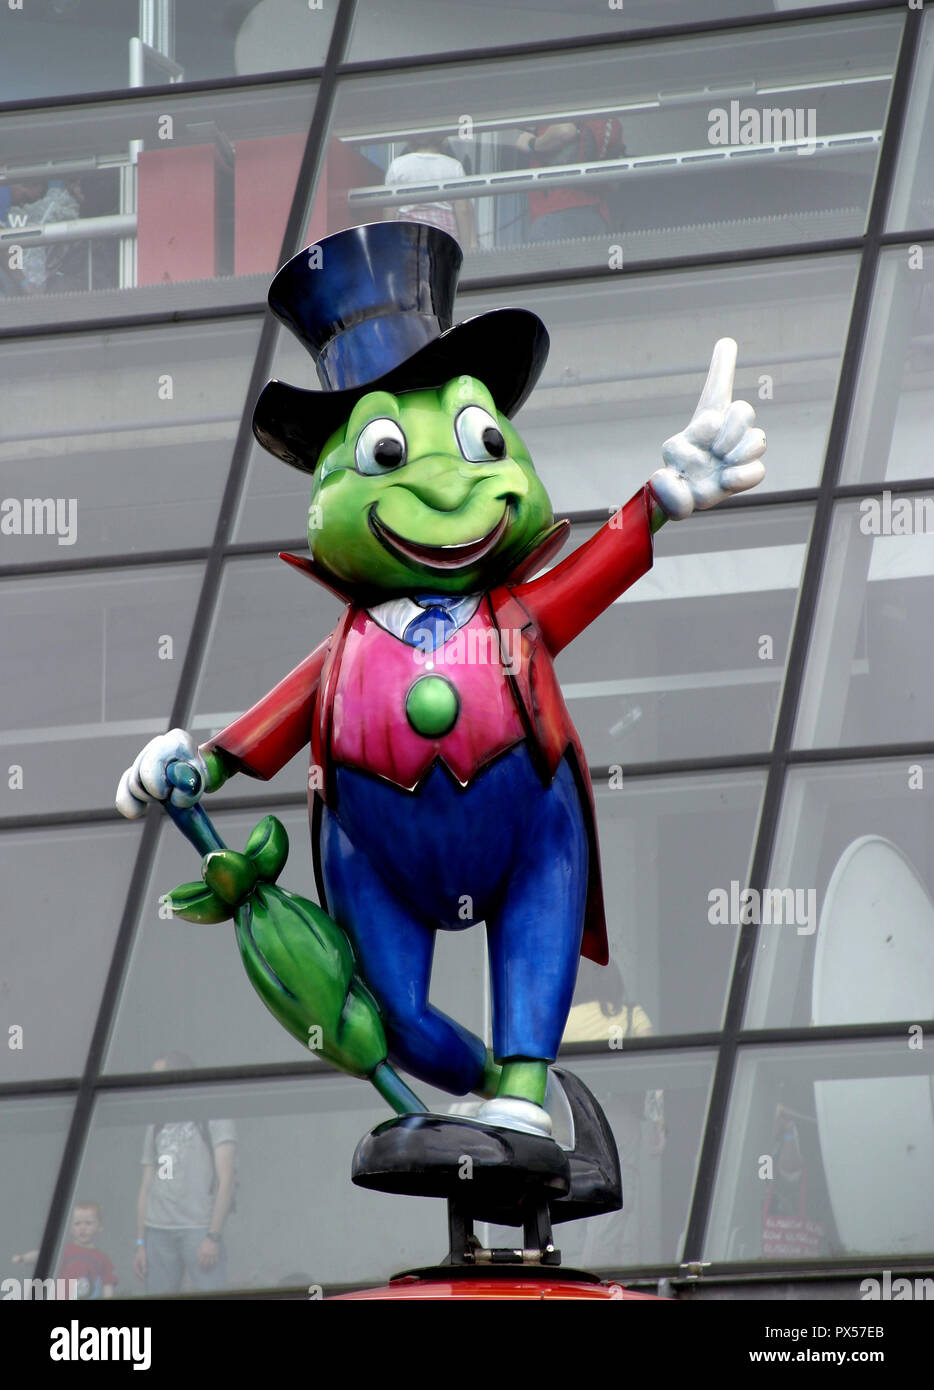 A delightful model of the Disney character, Jiminy Cricket, outside a shop somewhere. Stock Photo